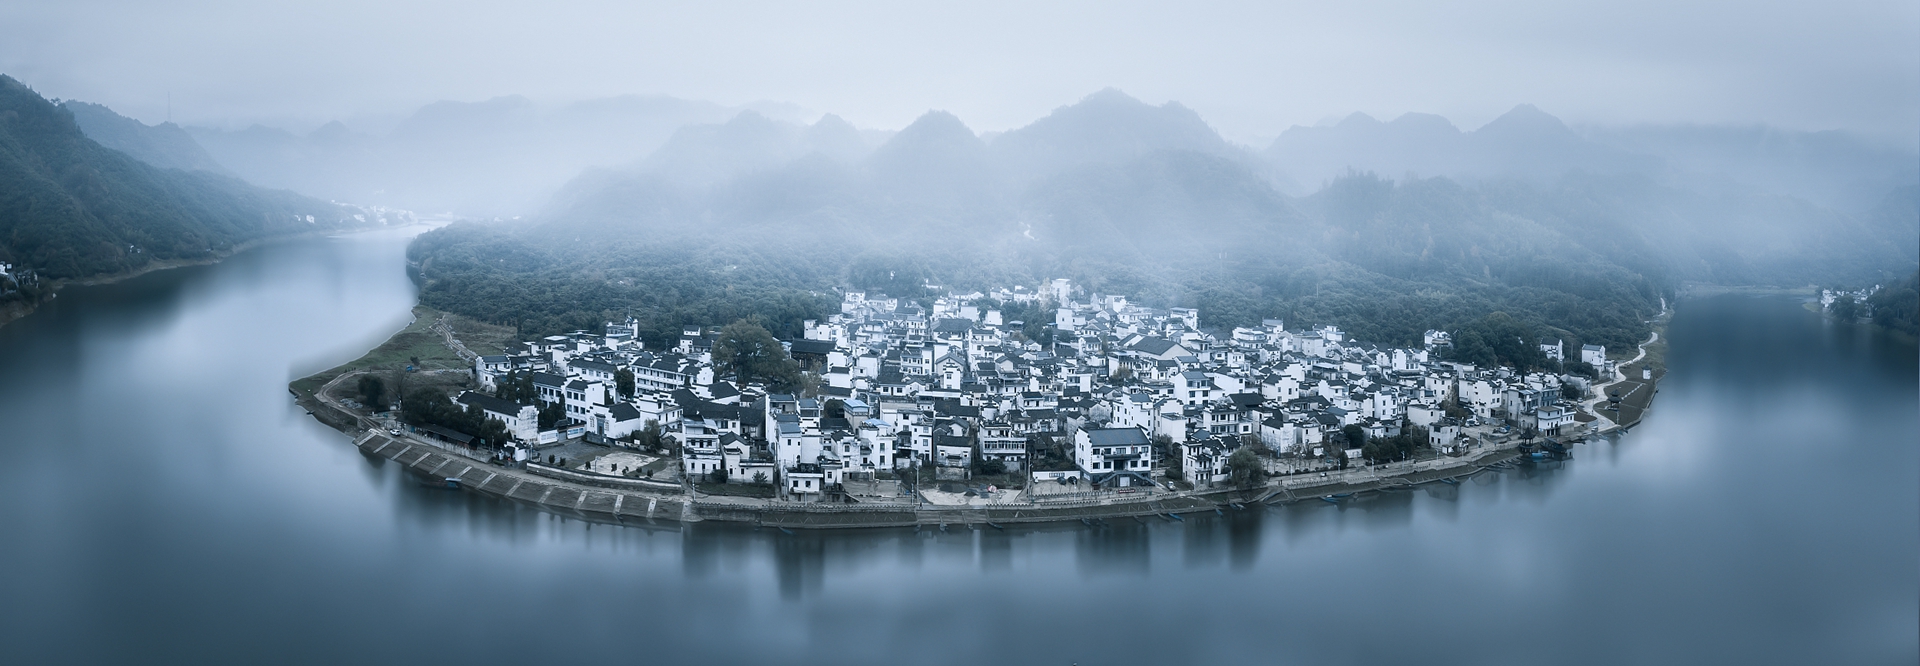 Overview of Huangshan city, Anhui